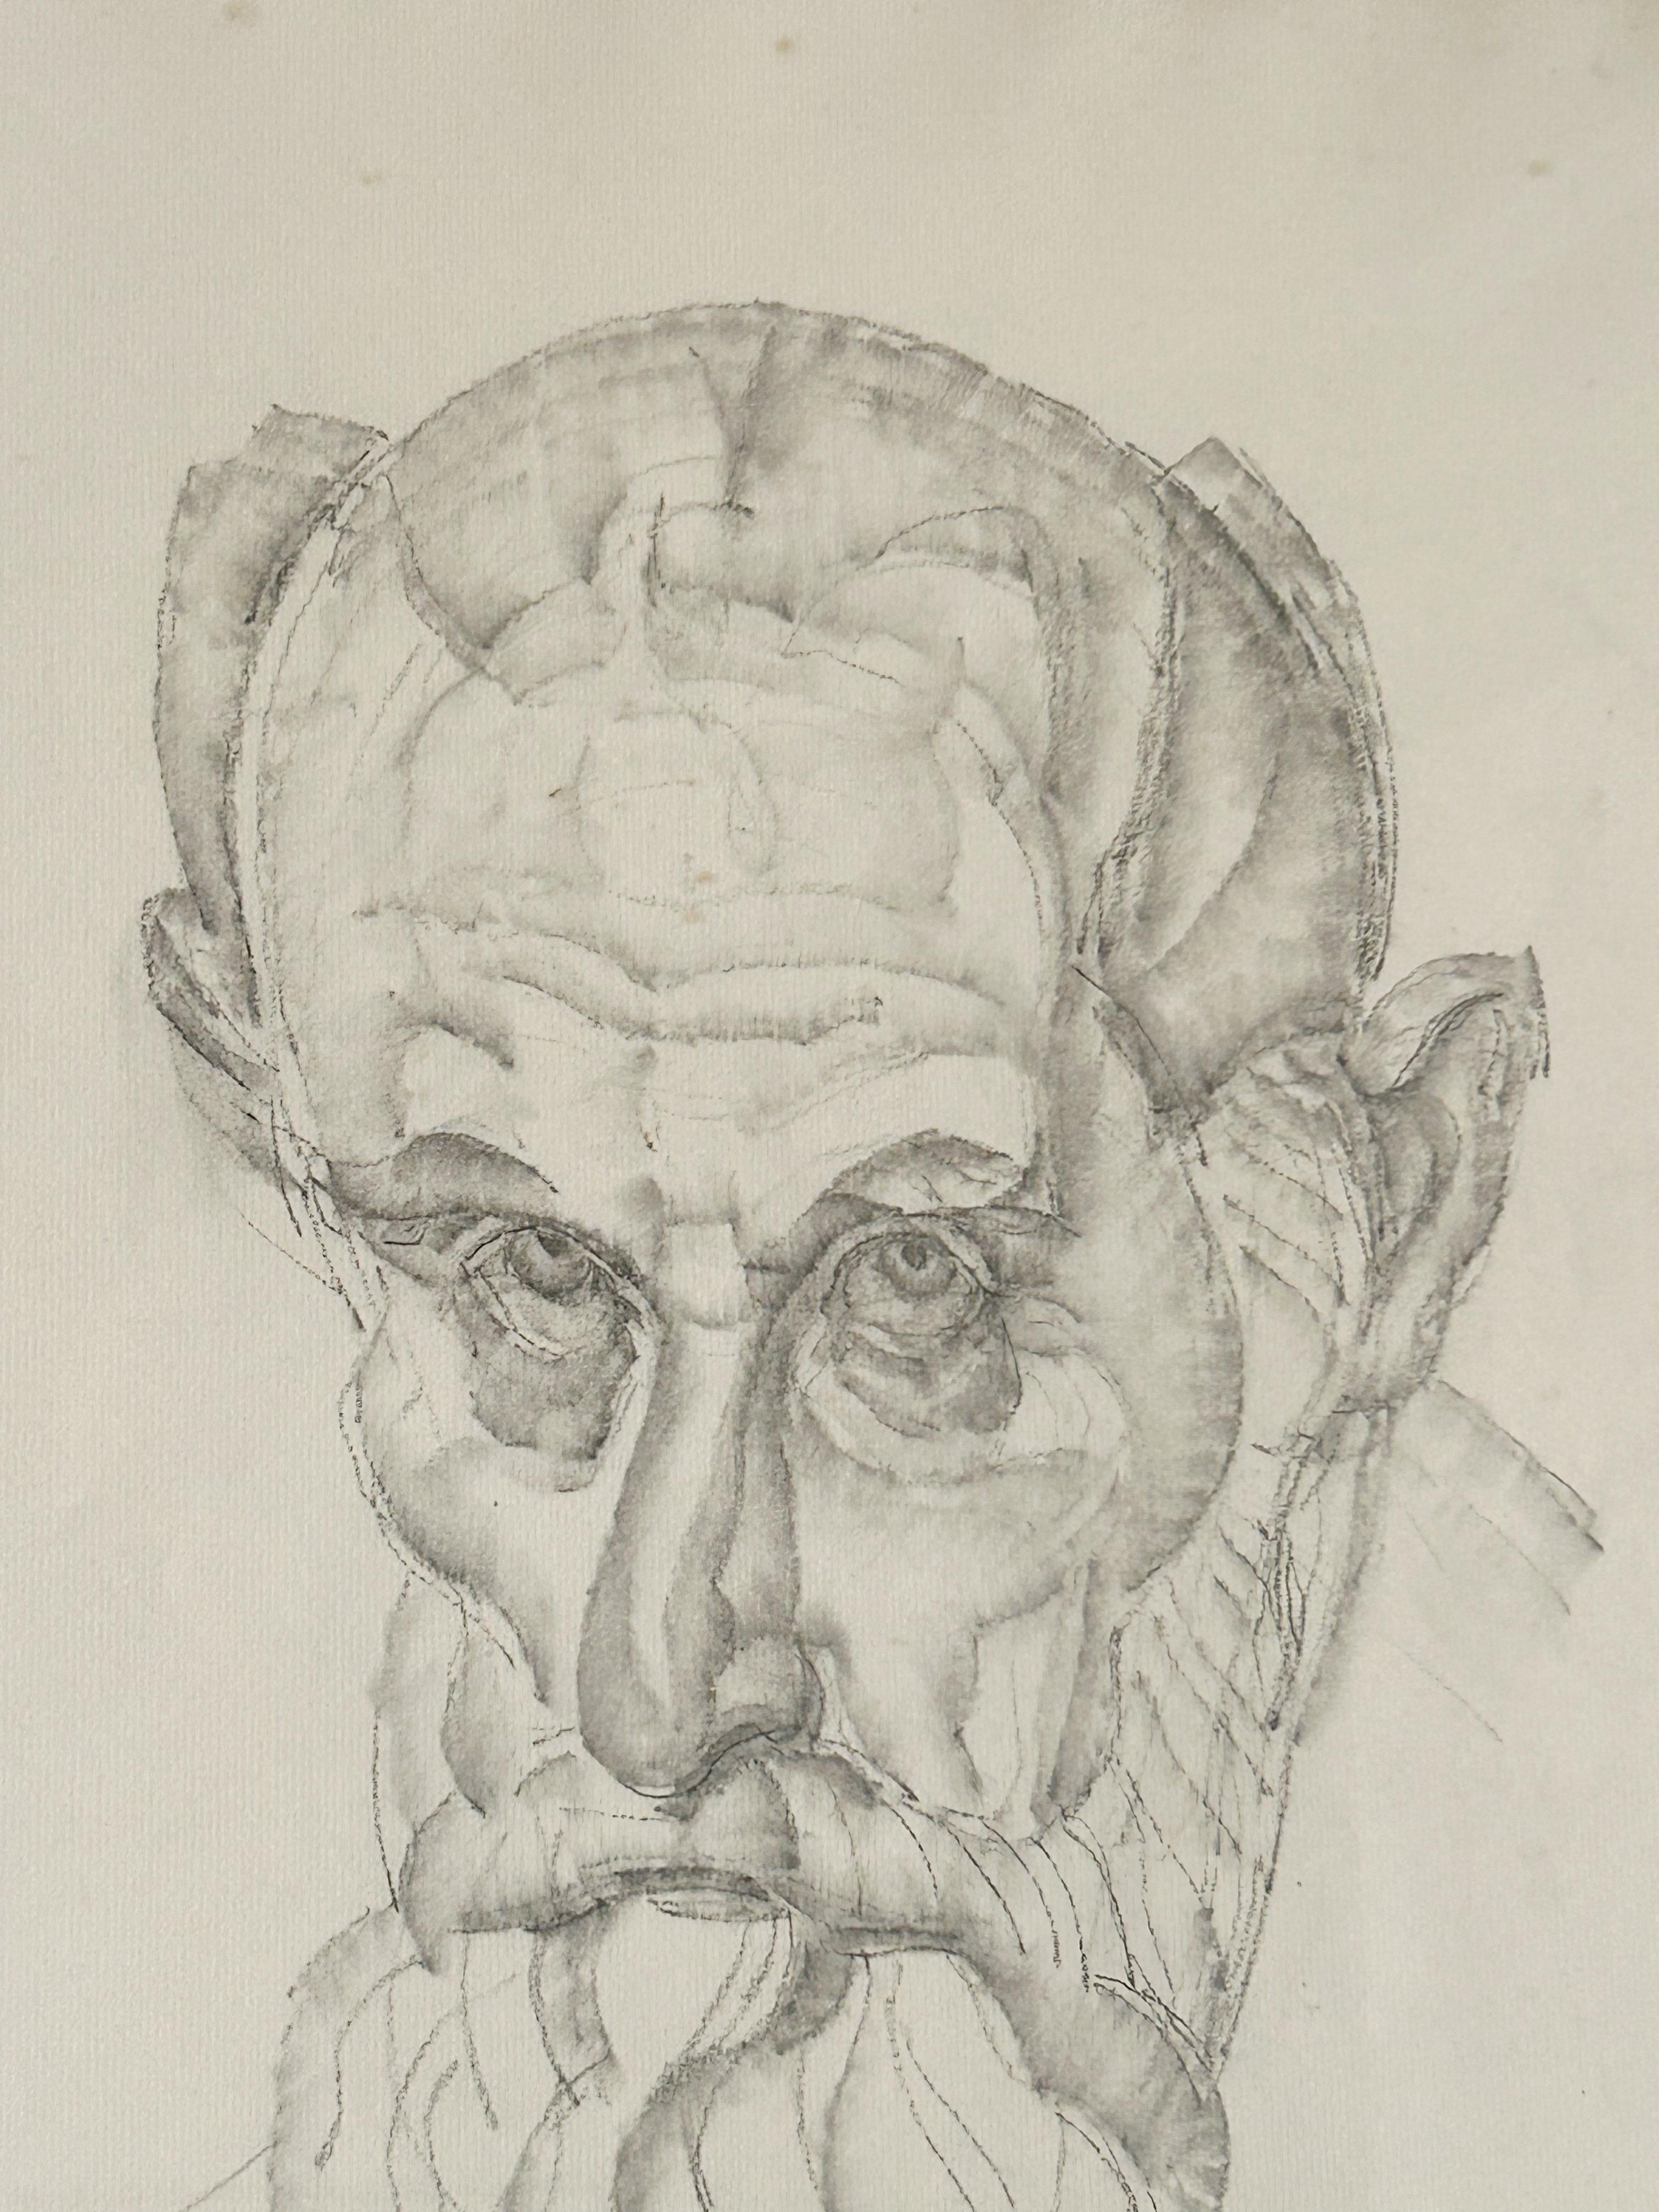 Jules OURY dit MARCEL-LENOIR (1872-1931)

Portrait of a bearded man, supposed self-portrait
Pencil and stump on paper
Signed 